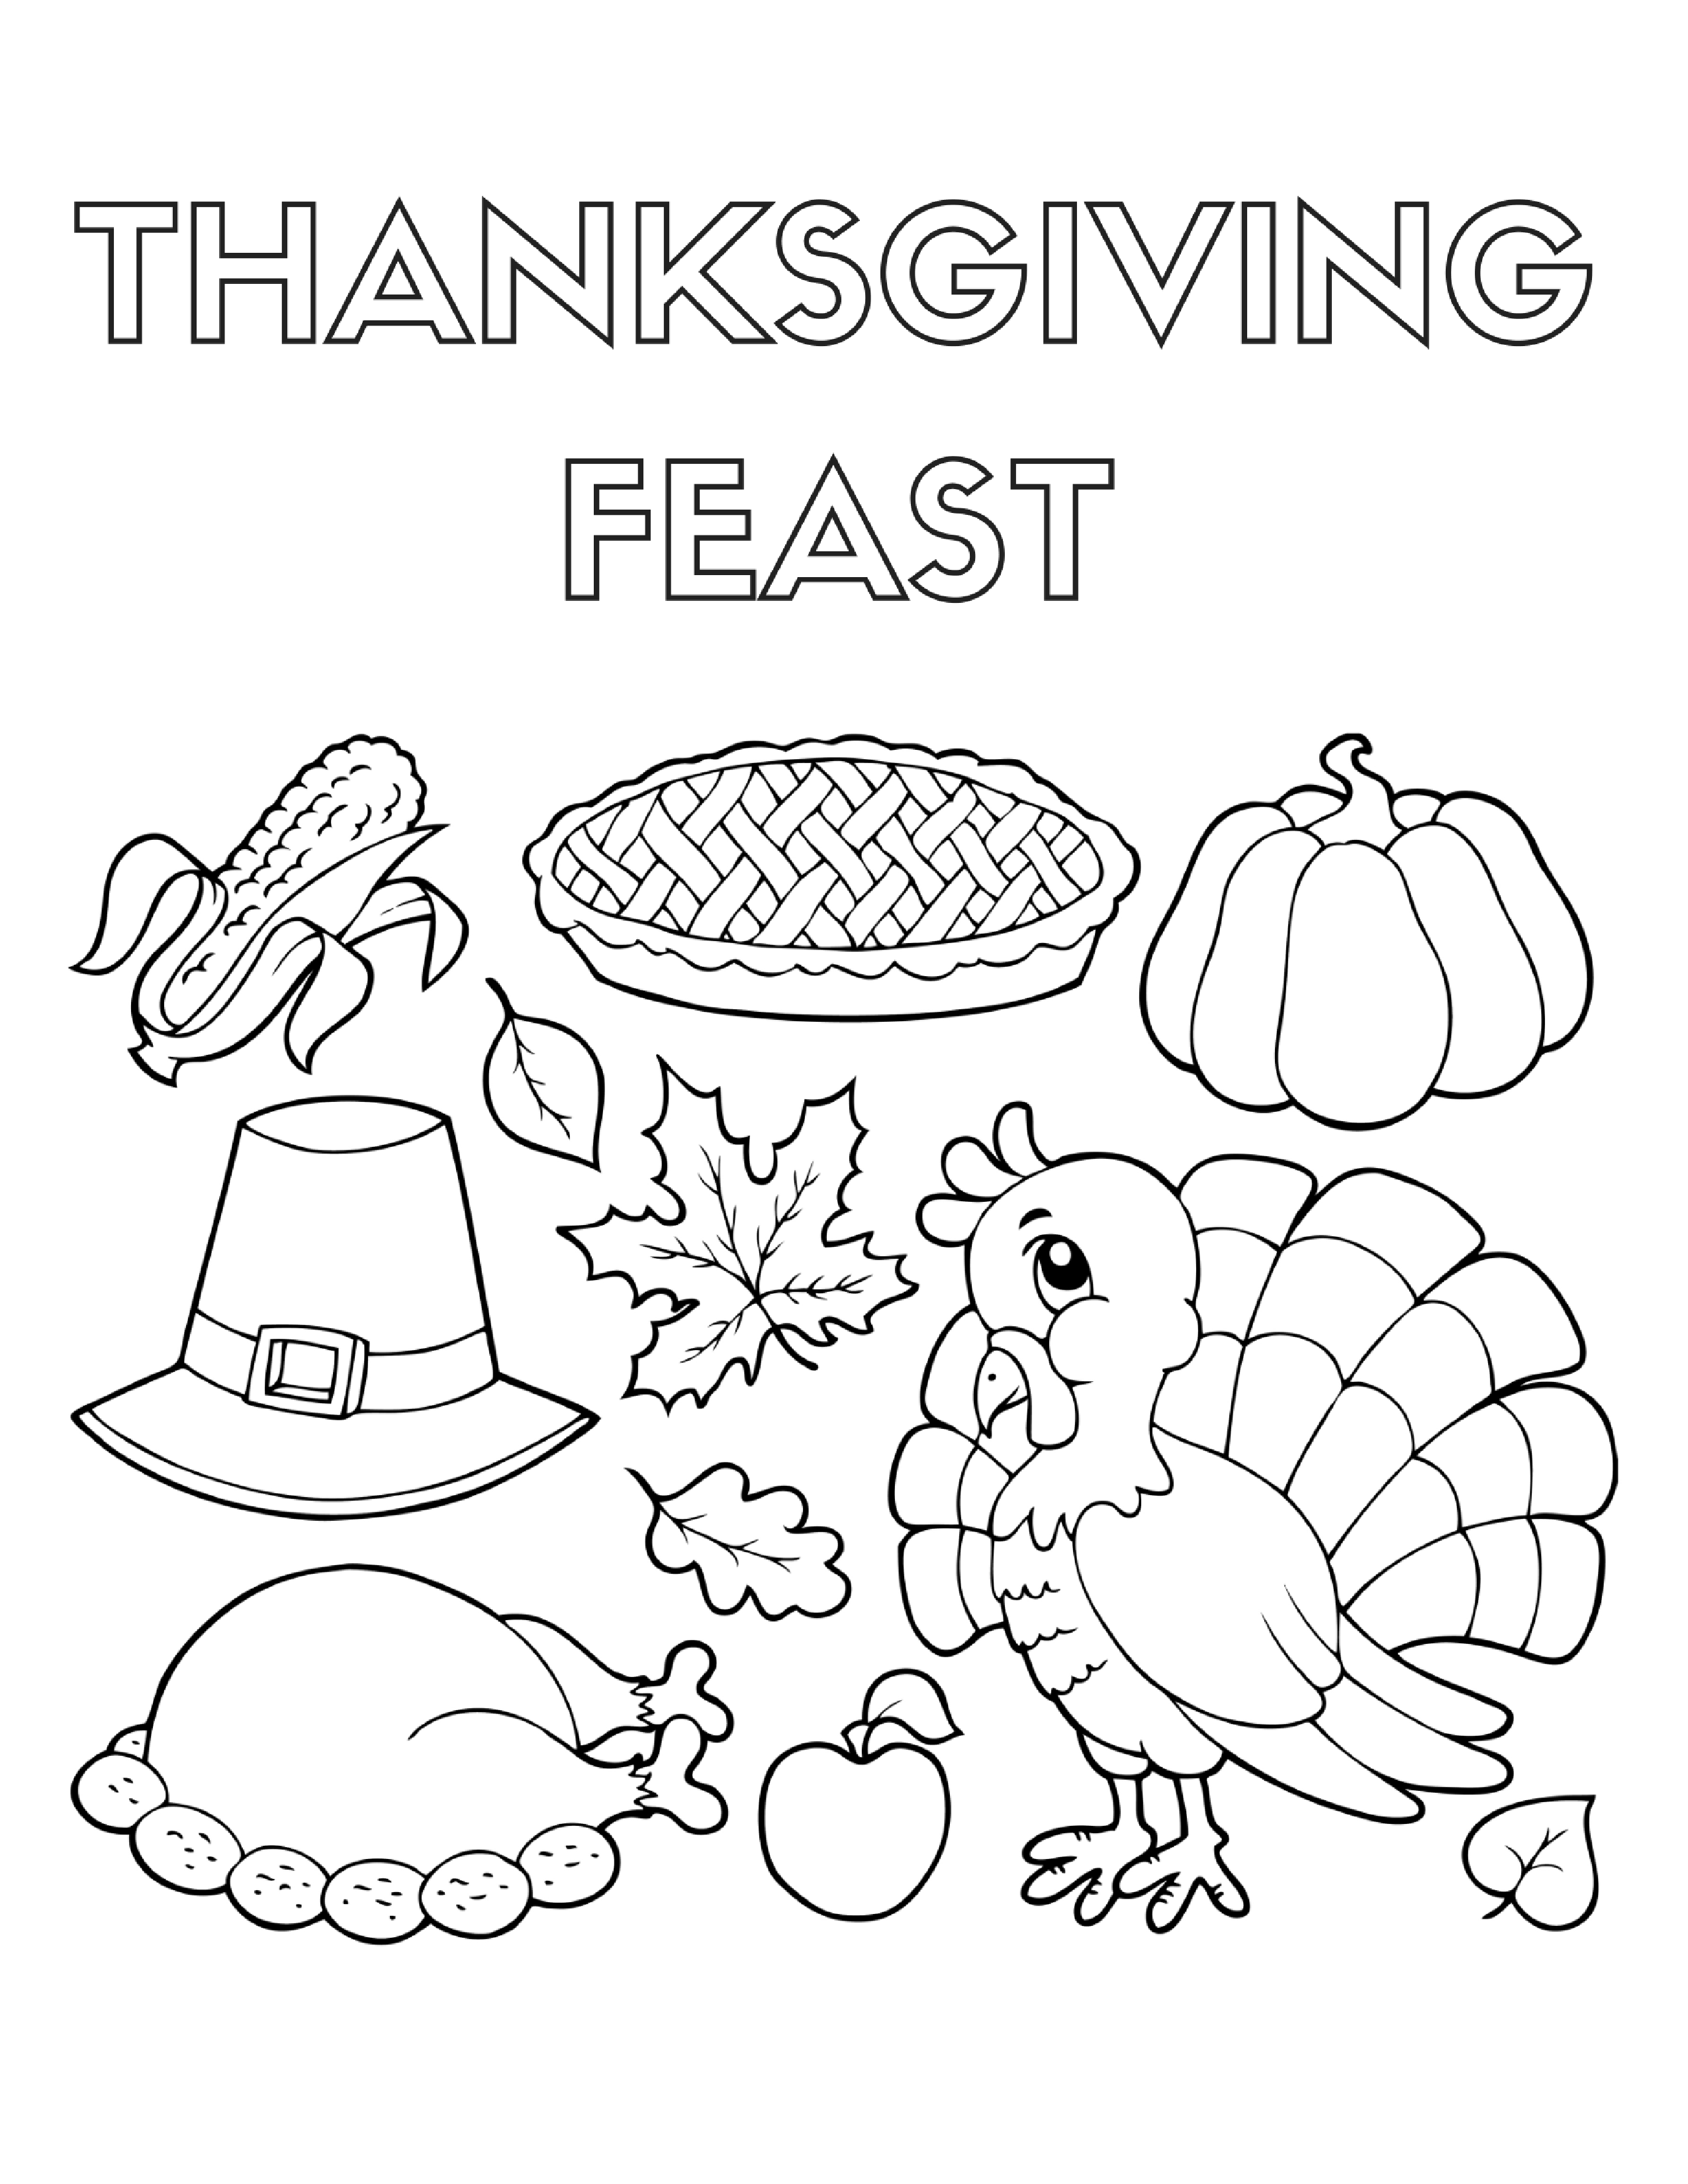 Thanksgiving Feast Coloring Page--Part of the Thanksgiving Color Page bundle.  Six coloring sheets in all, perfect for the holiday.